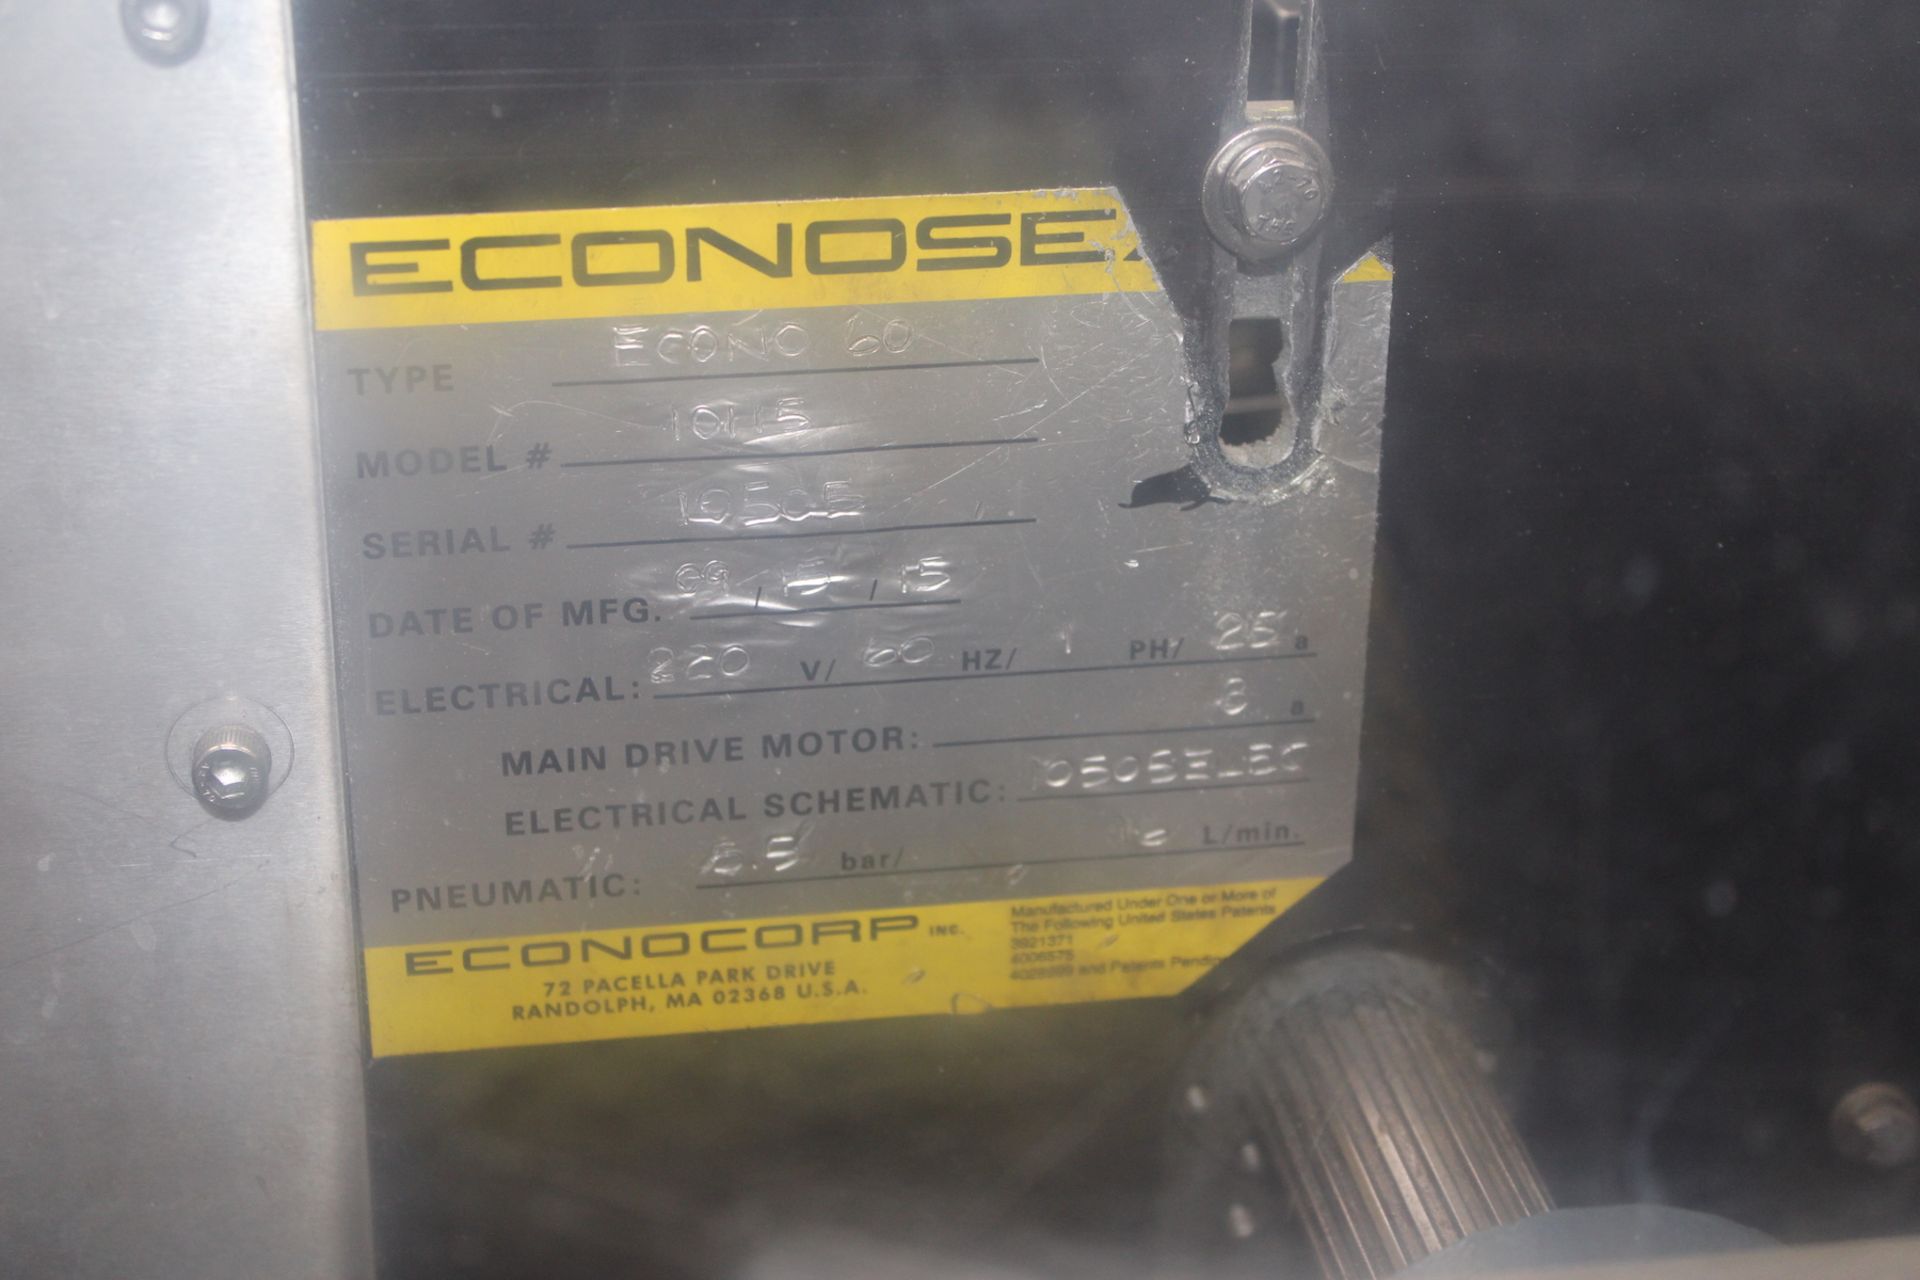 2015 ECONOCORP ECONOSEAL CONTINUOUS MOTION CARTONER, MODEL 10115, S/N 10505 TYPE ECONO 60, EQUPPED - Image 7 of 10